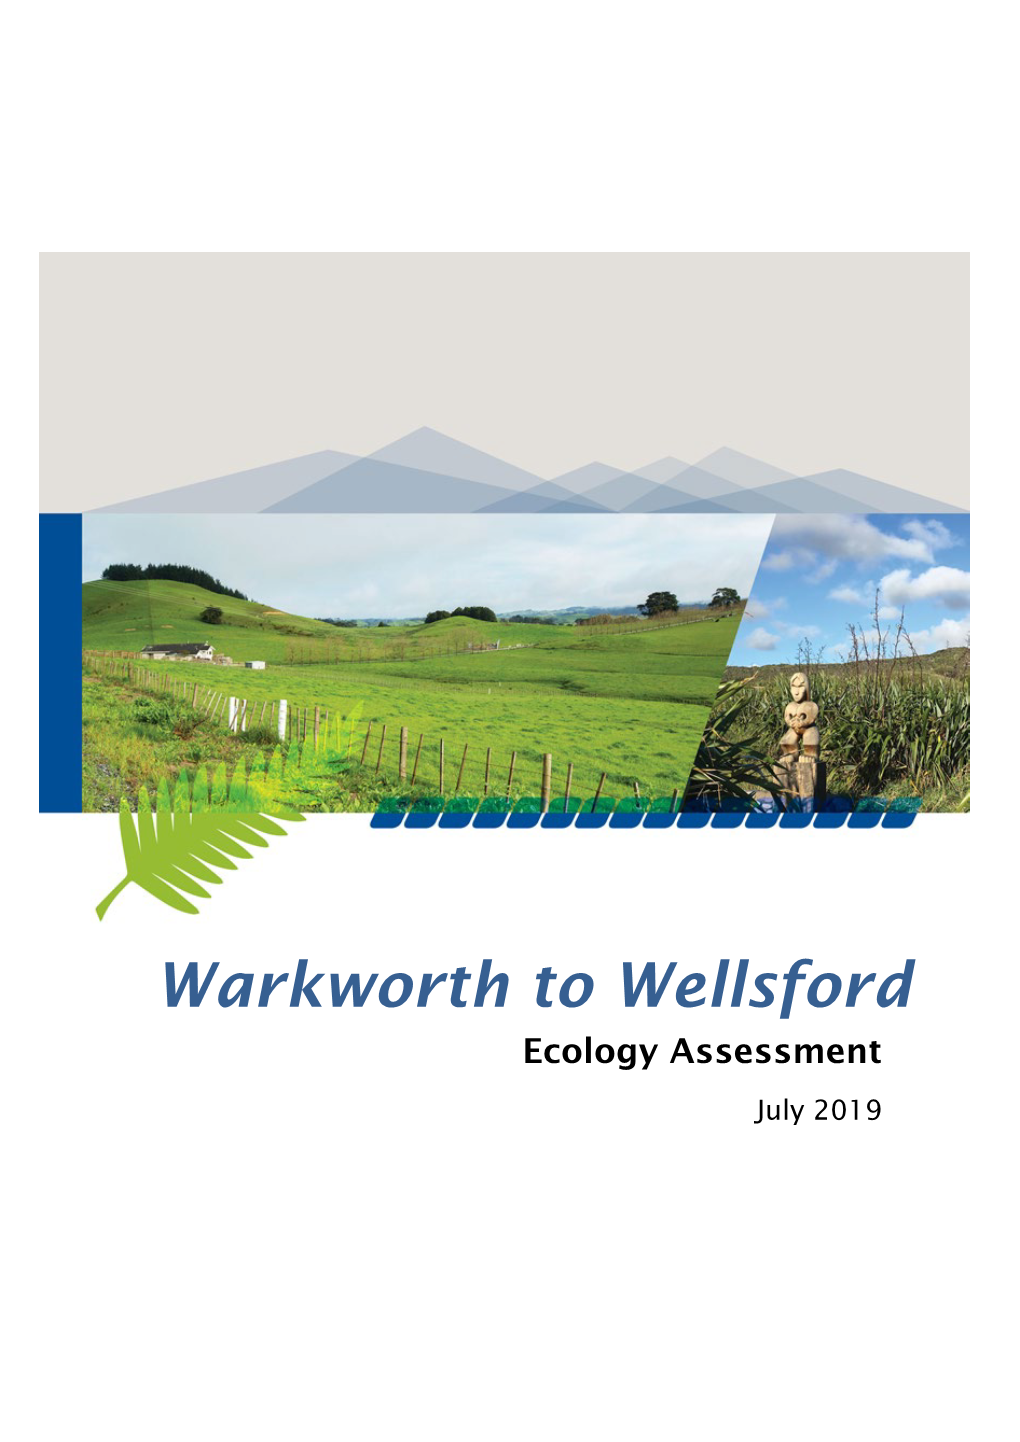 Warkworth to Wellsford Ecology Assessment